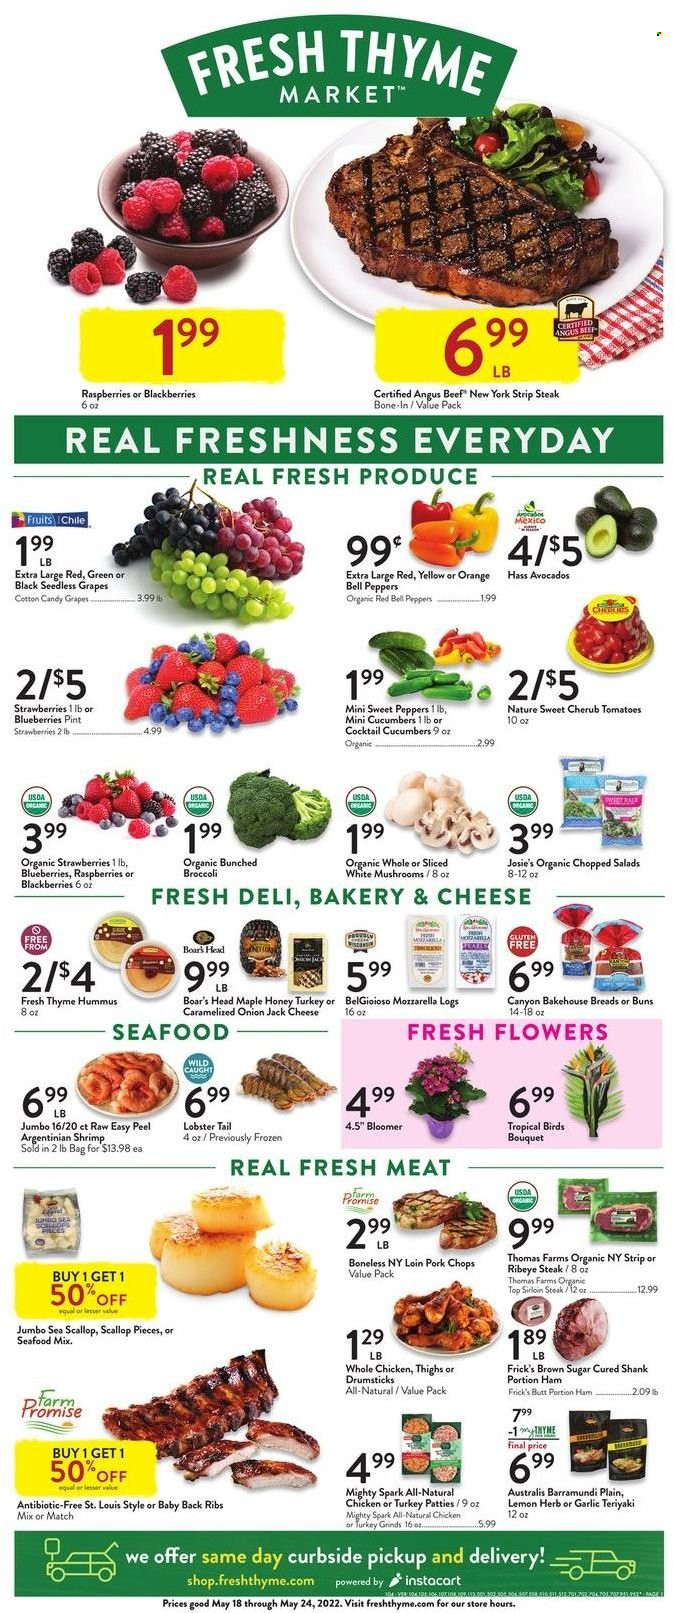 thumbnail - Fresh Thyme Flyer - 05/18/2022 - 05/24/2022 - Sales products - mushrooms, buns, bell peppers, broccoli, cucumber, garlic, sweet peppers, tomatoes, onion, peppers, chopped salad, avocado, blackberries, blueberries, grapes, seedless grapes, strawberries, oranges, barramundi, lobster, scallops, seafood, lobster tail, shrimps, ham, hummus, mozzarella, cotton candy, cane sugar, honey, whole chicken, beef meat, beef sirloin, beef steak, steak, sirloin steak, ribeye steak, striploin steak, pork chops, pork meat, pork ribs, pork back ribs, bouquet. Page 1.